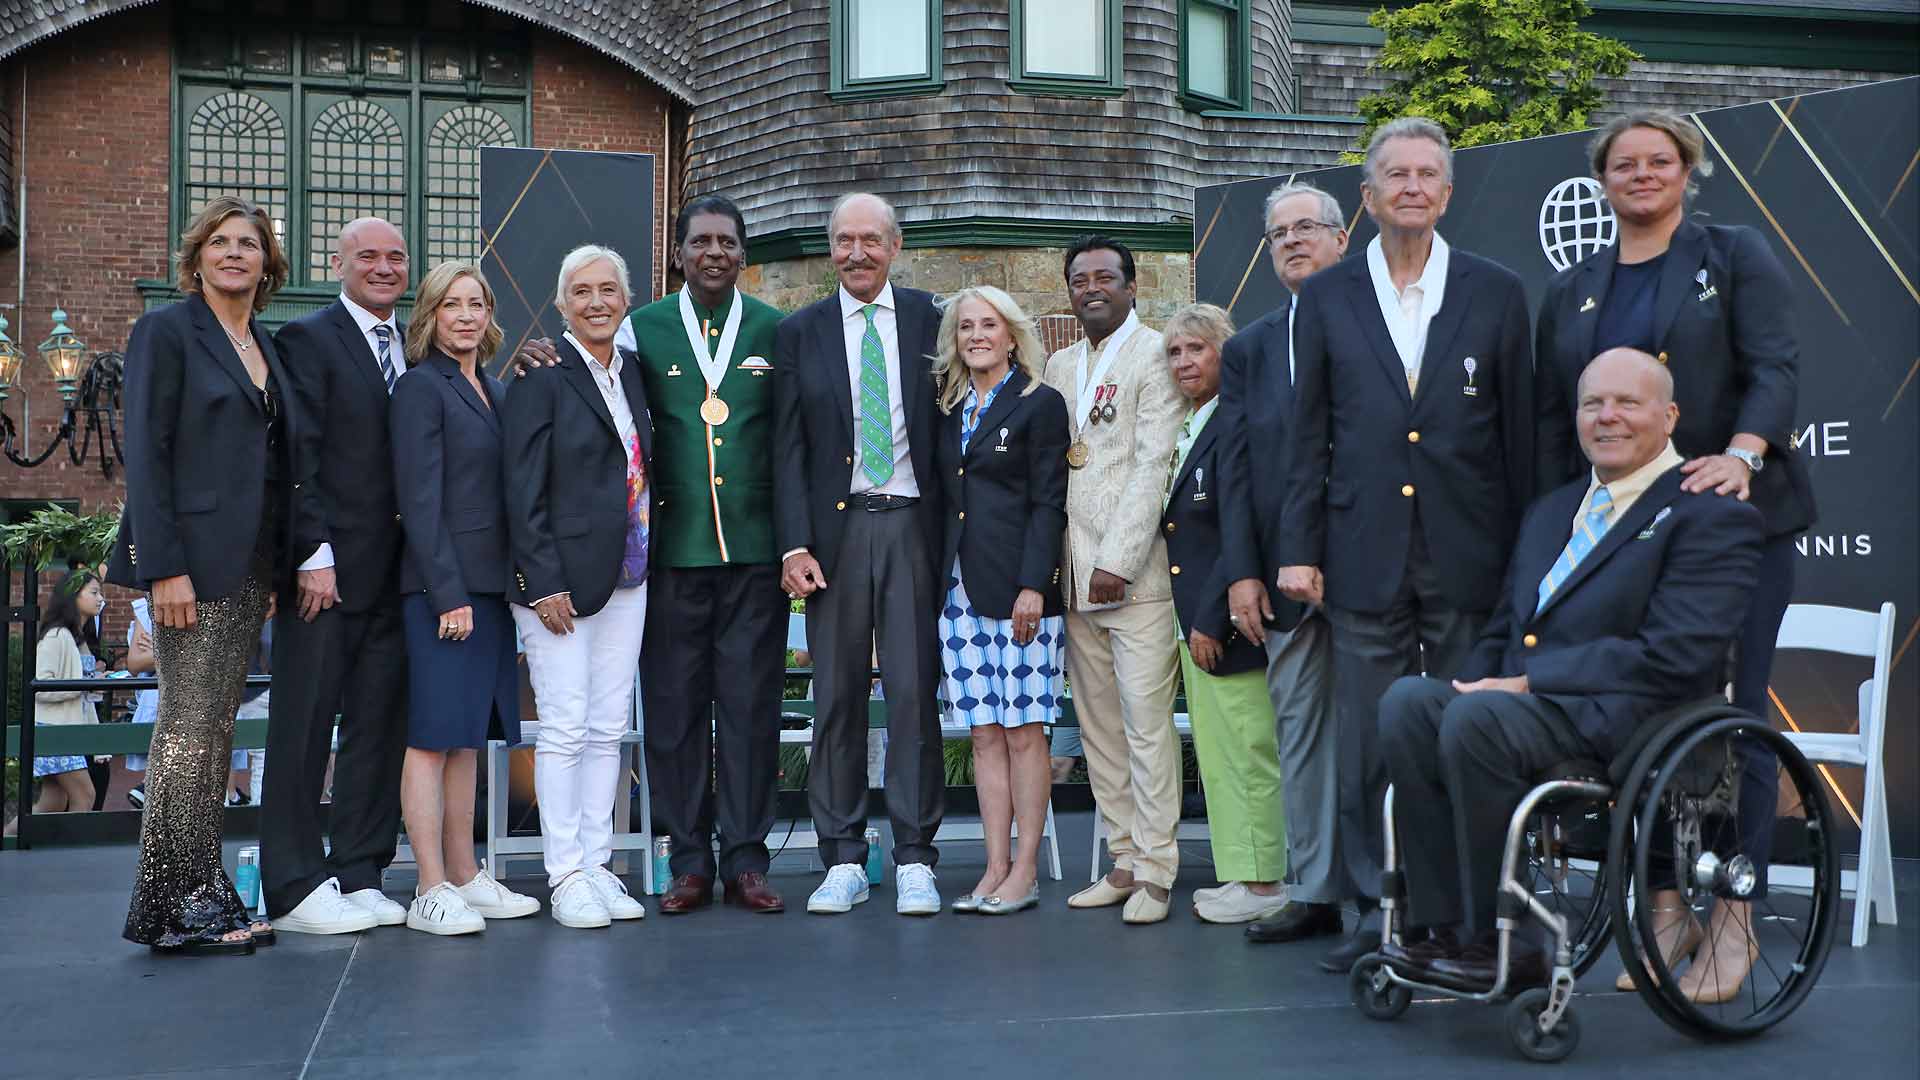 Paes, Amritraj & Evans inducted into International Tennis Hall of Fame